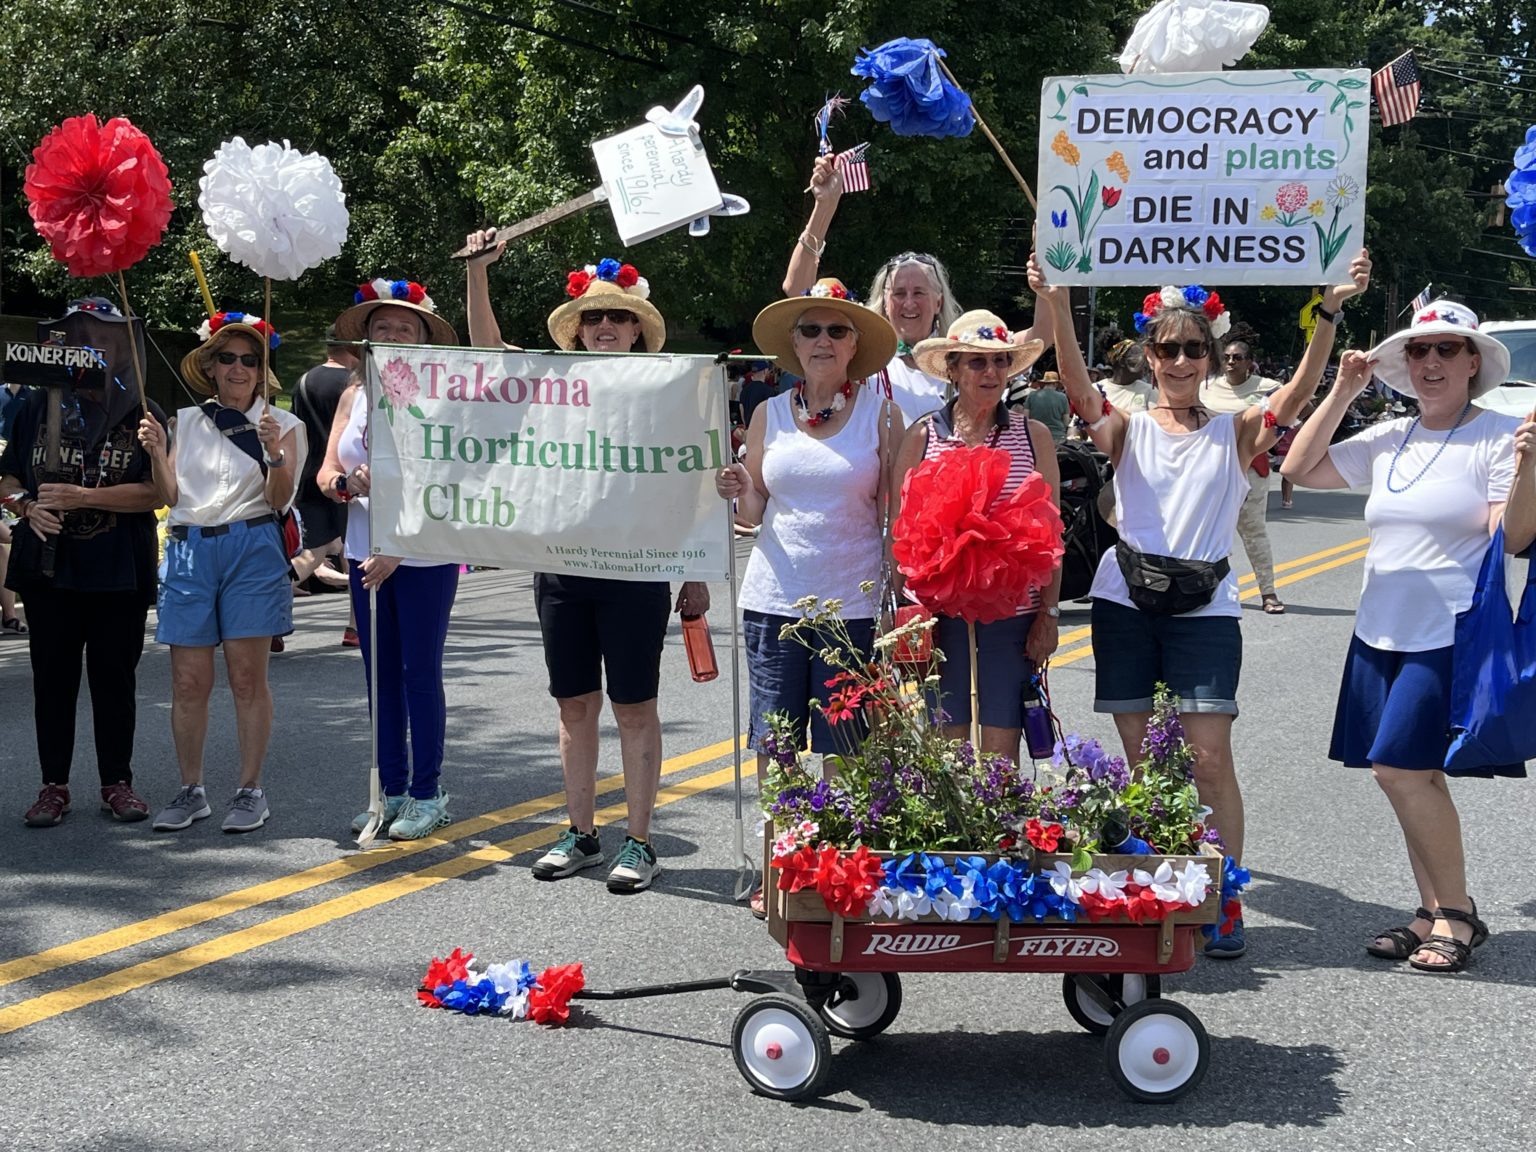 Club members marching in the 4th of July parade with a sign that says: Democracy and Plants Die in Darkness".